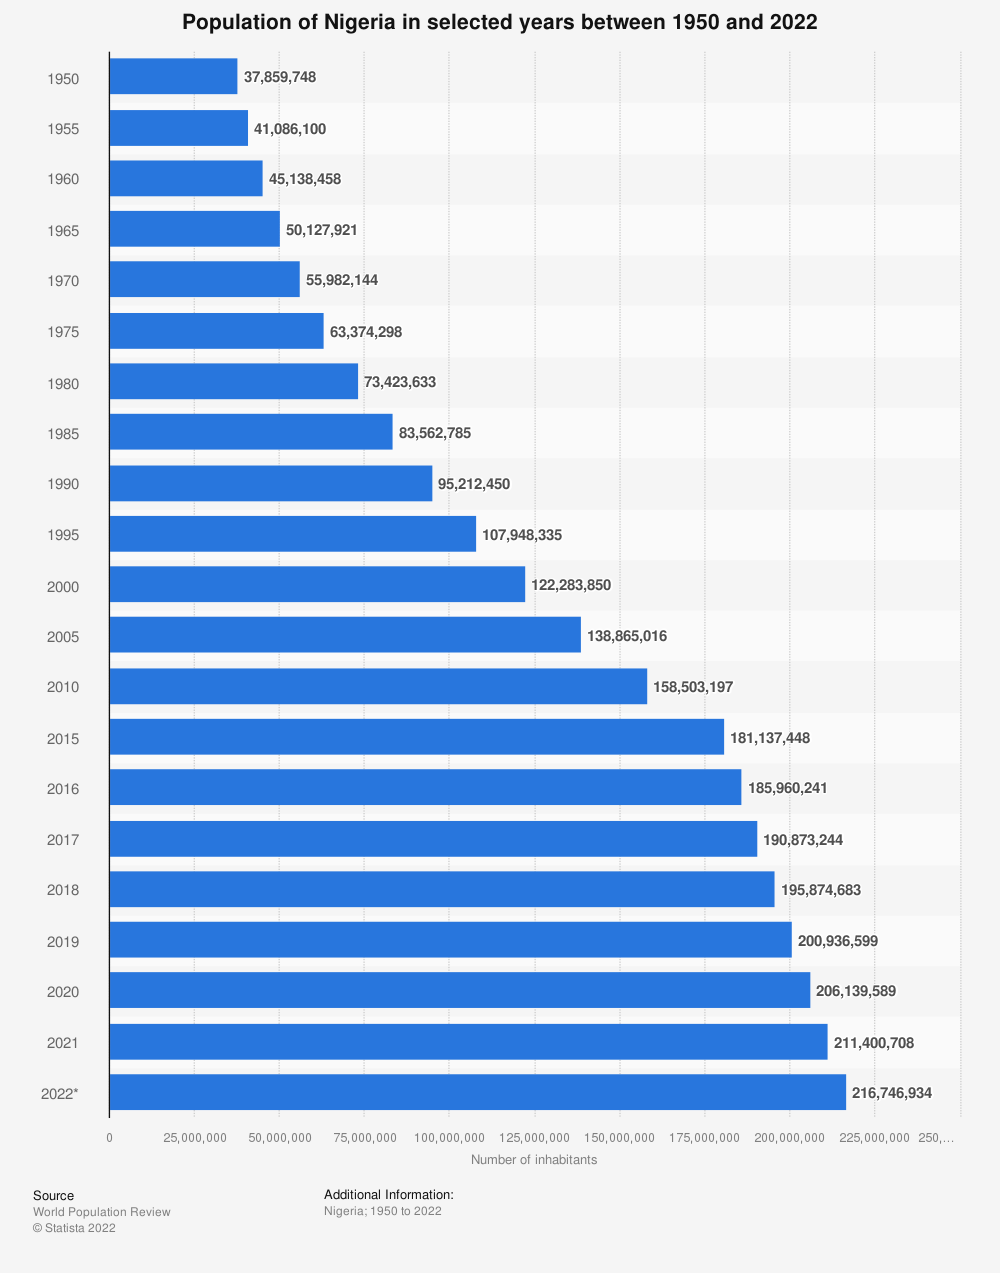 Population of Nigeria from 1950 to 2022. Source: Statista